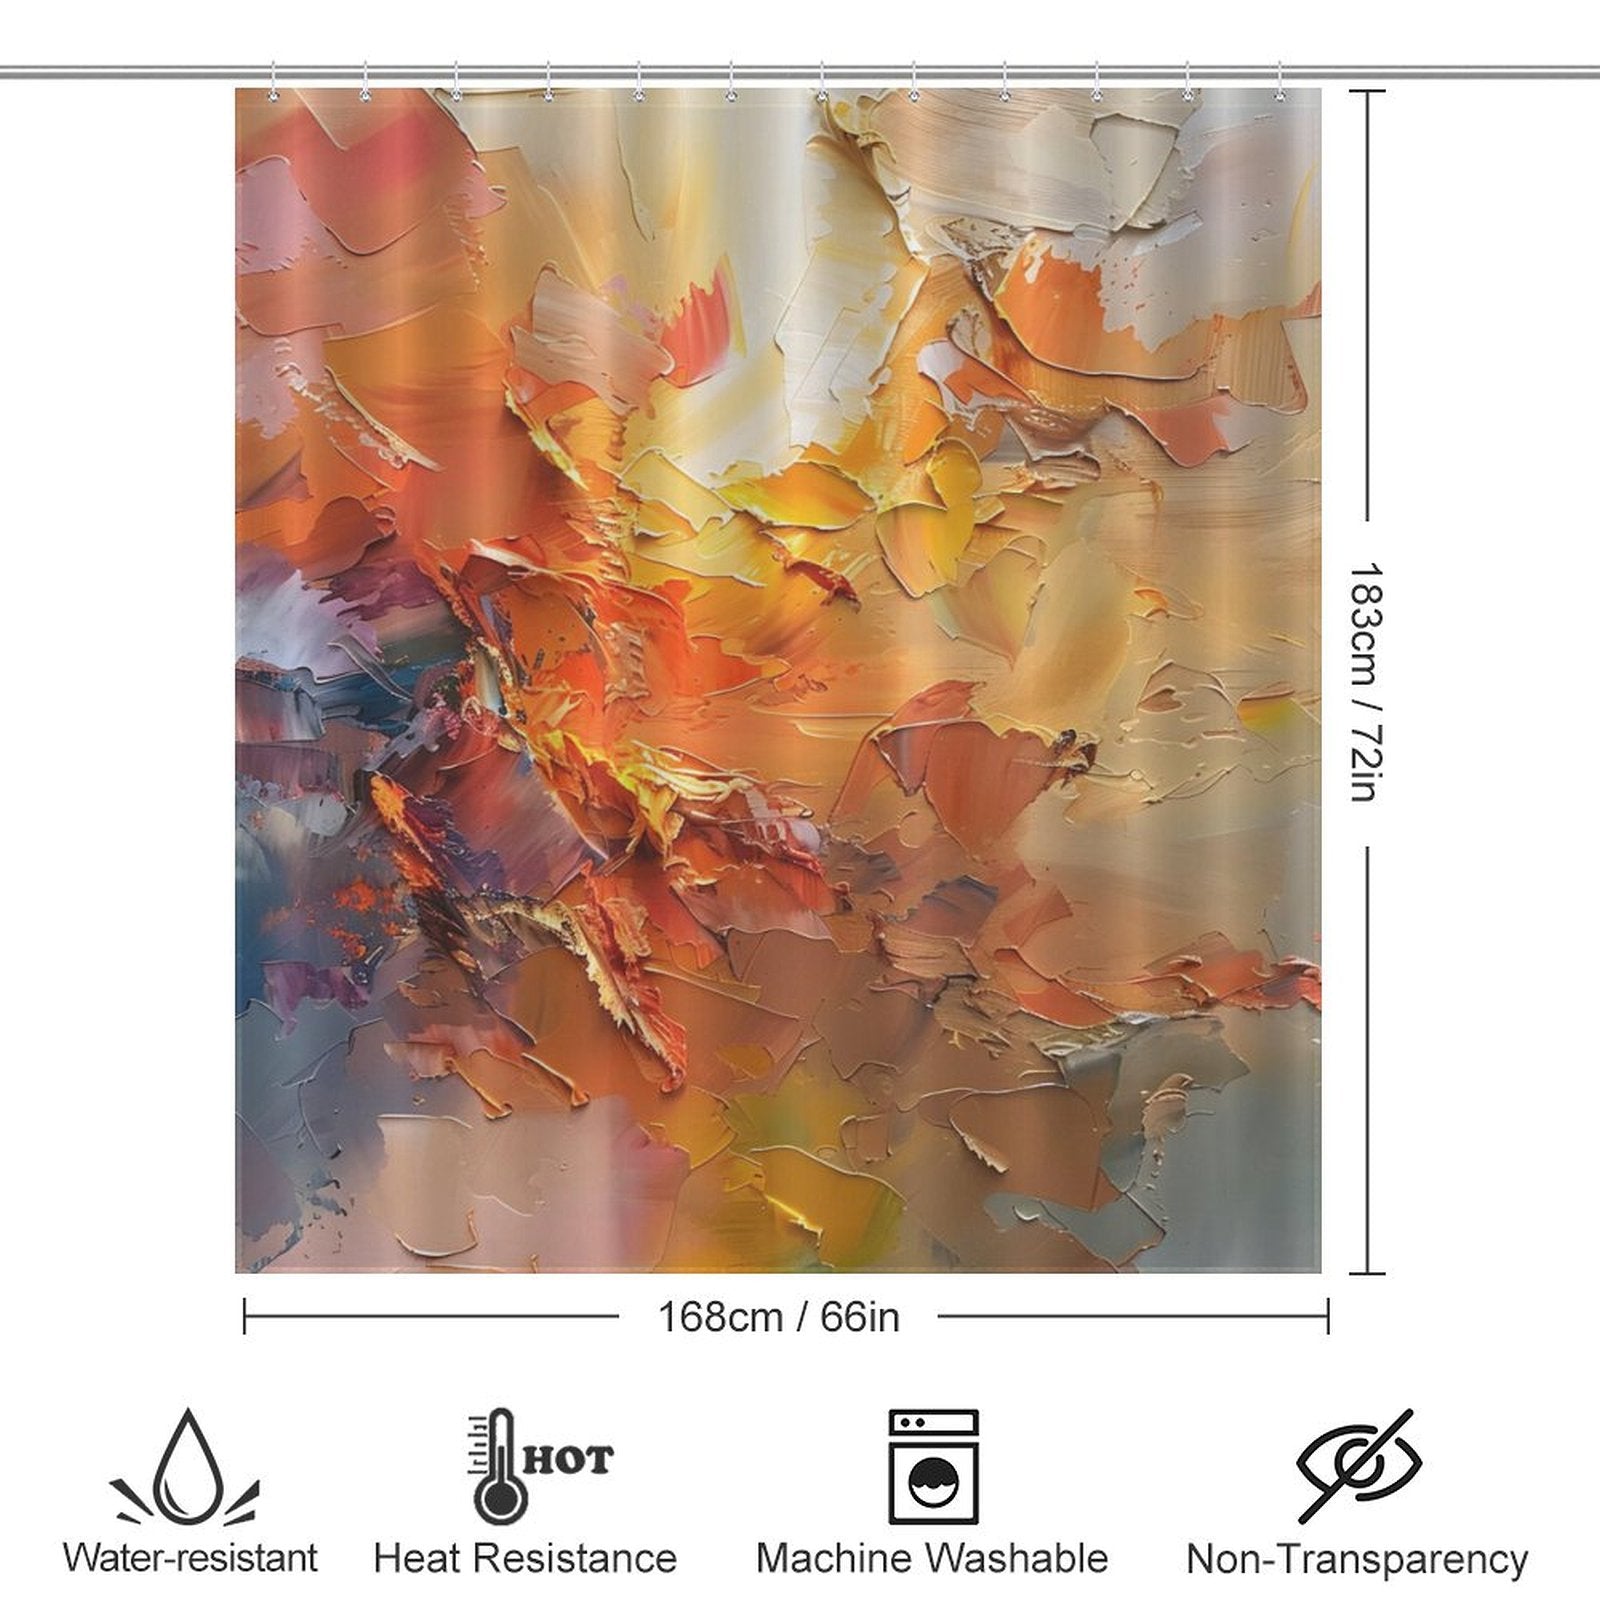 Abstract floral shower curtain with vibrant orange and yellow hues, measuring 183cm by 168cm. This Burnt Orange Abstract Oil Painting Modern Art Yellow Blue Brushstrokes Shower Curtain-Cottoncat by Cotton Cat features icons indicating it is water-resistant, heat-resistant, machine washable, and non-transparent.